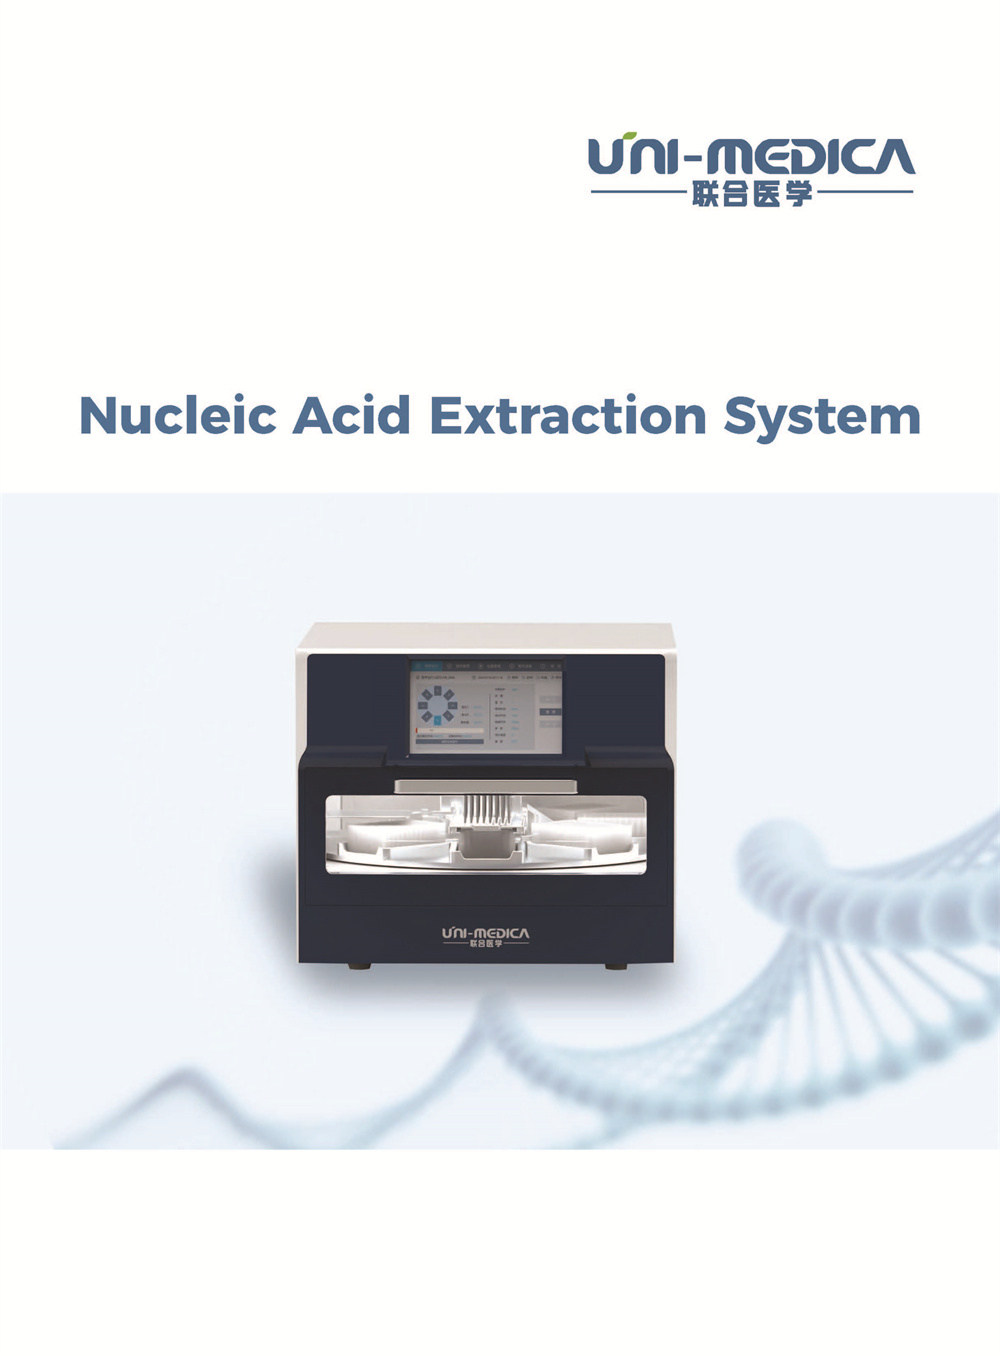 NUCLEIC ACID EXTRACTION SYSTEM R1